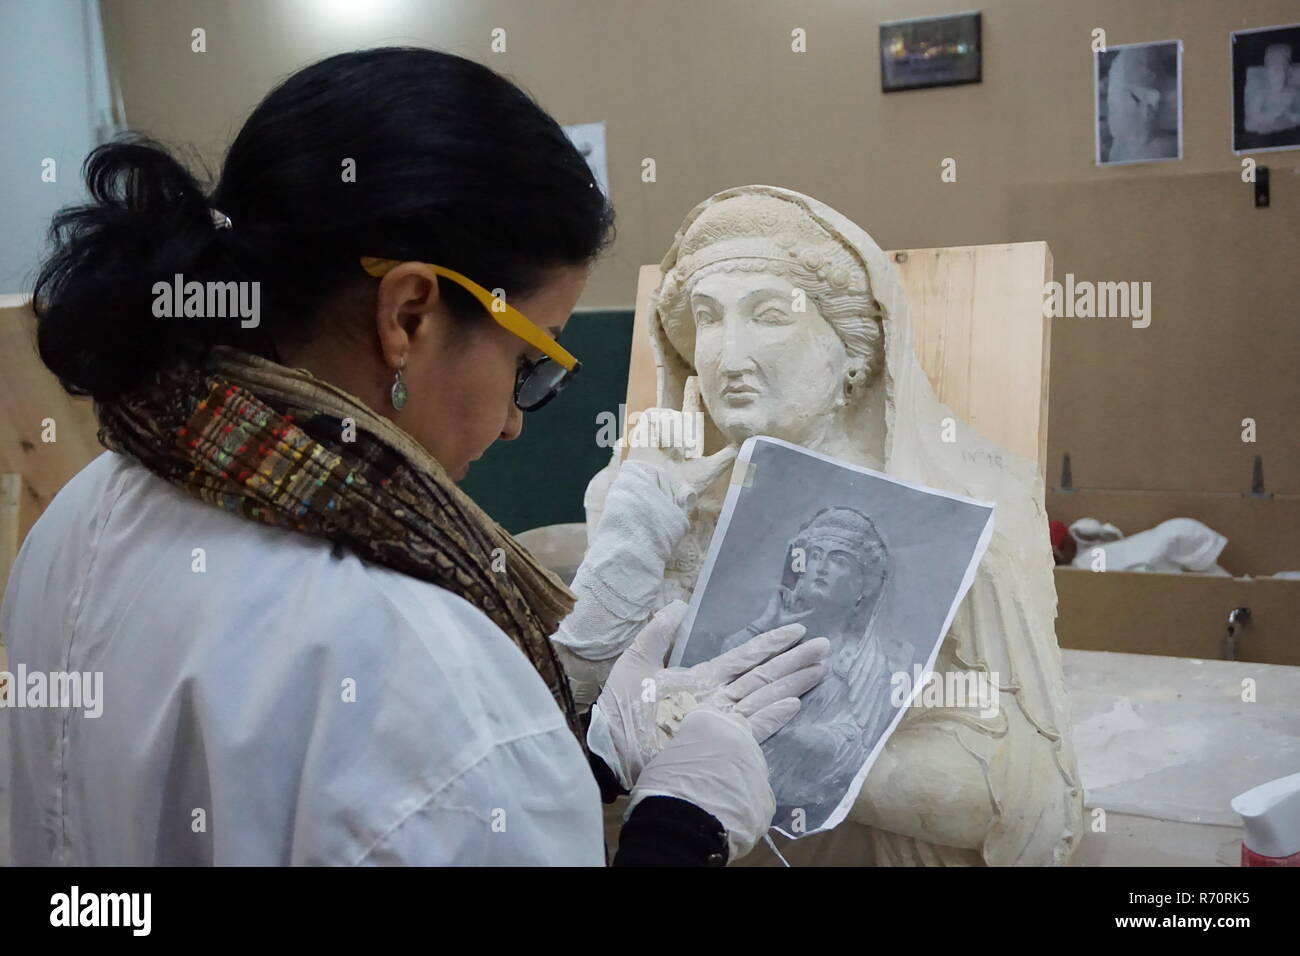 (181207) -- DAMASCUS, Dec. 7, 2018 (Xinhua) -- Heba Jouma, a conservator-restorer from the ancient city of Palmyra in Syria and a member of a Syrian restoration experts' team, works at the National Museum of Damascus in Damascus, Syria, on Dec. 5, 2018. Heba Jouma works to bring back ancient features to the sculptures damaged by the Islamic State (IS) group. The IS group had stormed Palmyra twice during the more than seven-year-long war, destroying precious archeological sites, such as temples and tombs, and shattering sculptures into pieces in the ancient oasis city, which is registered by th Stock Photo